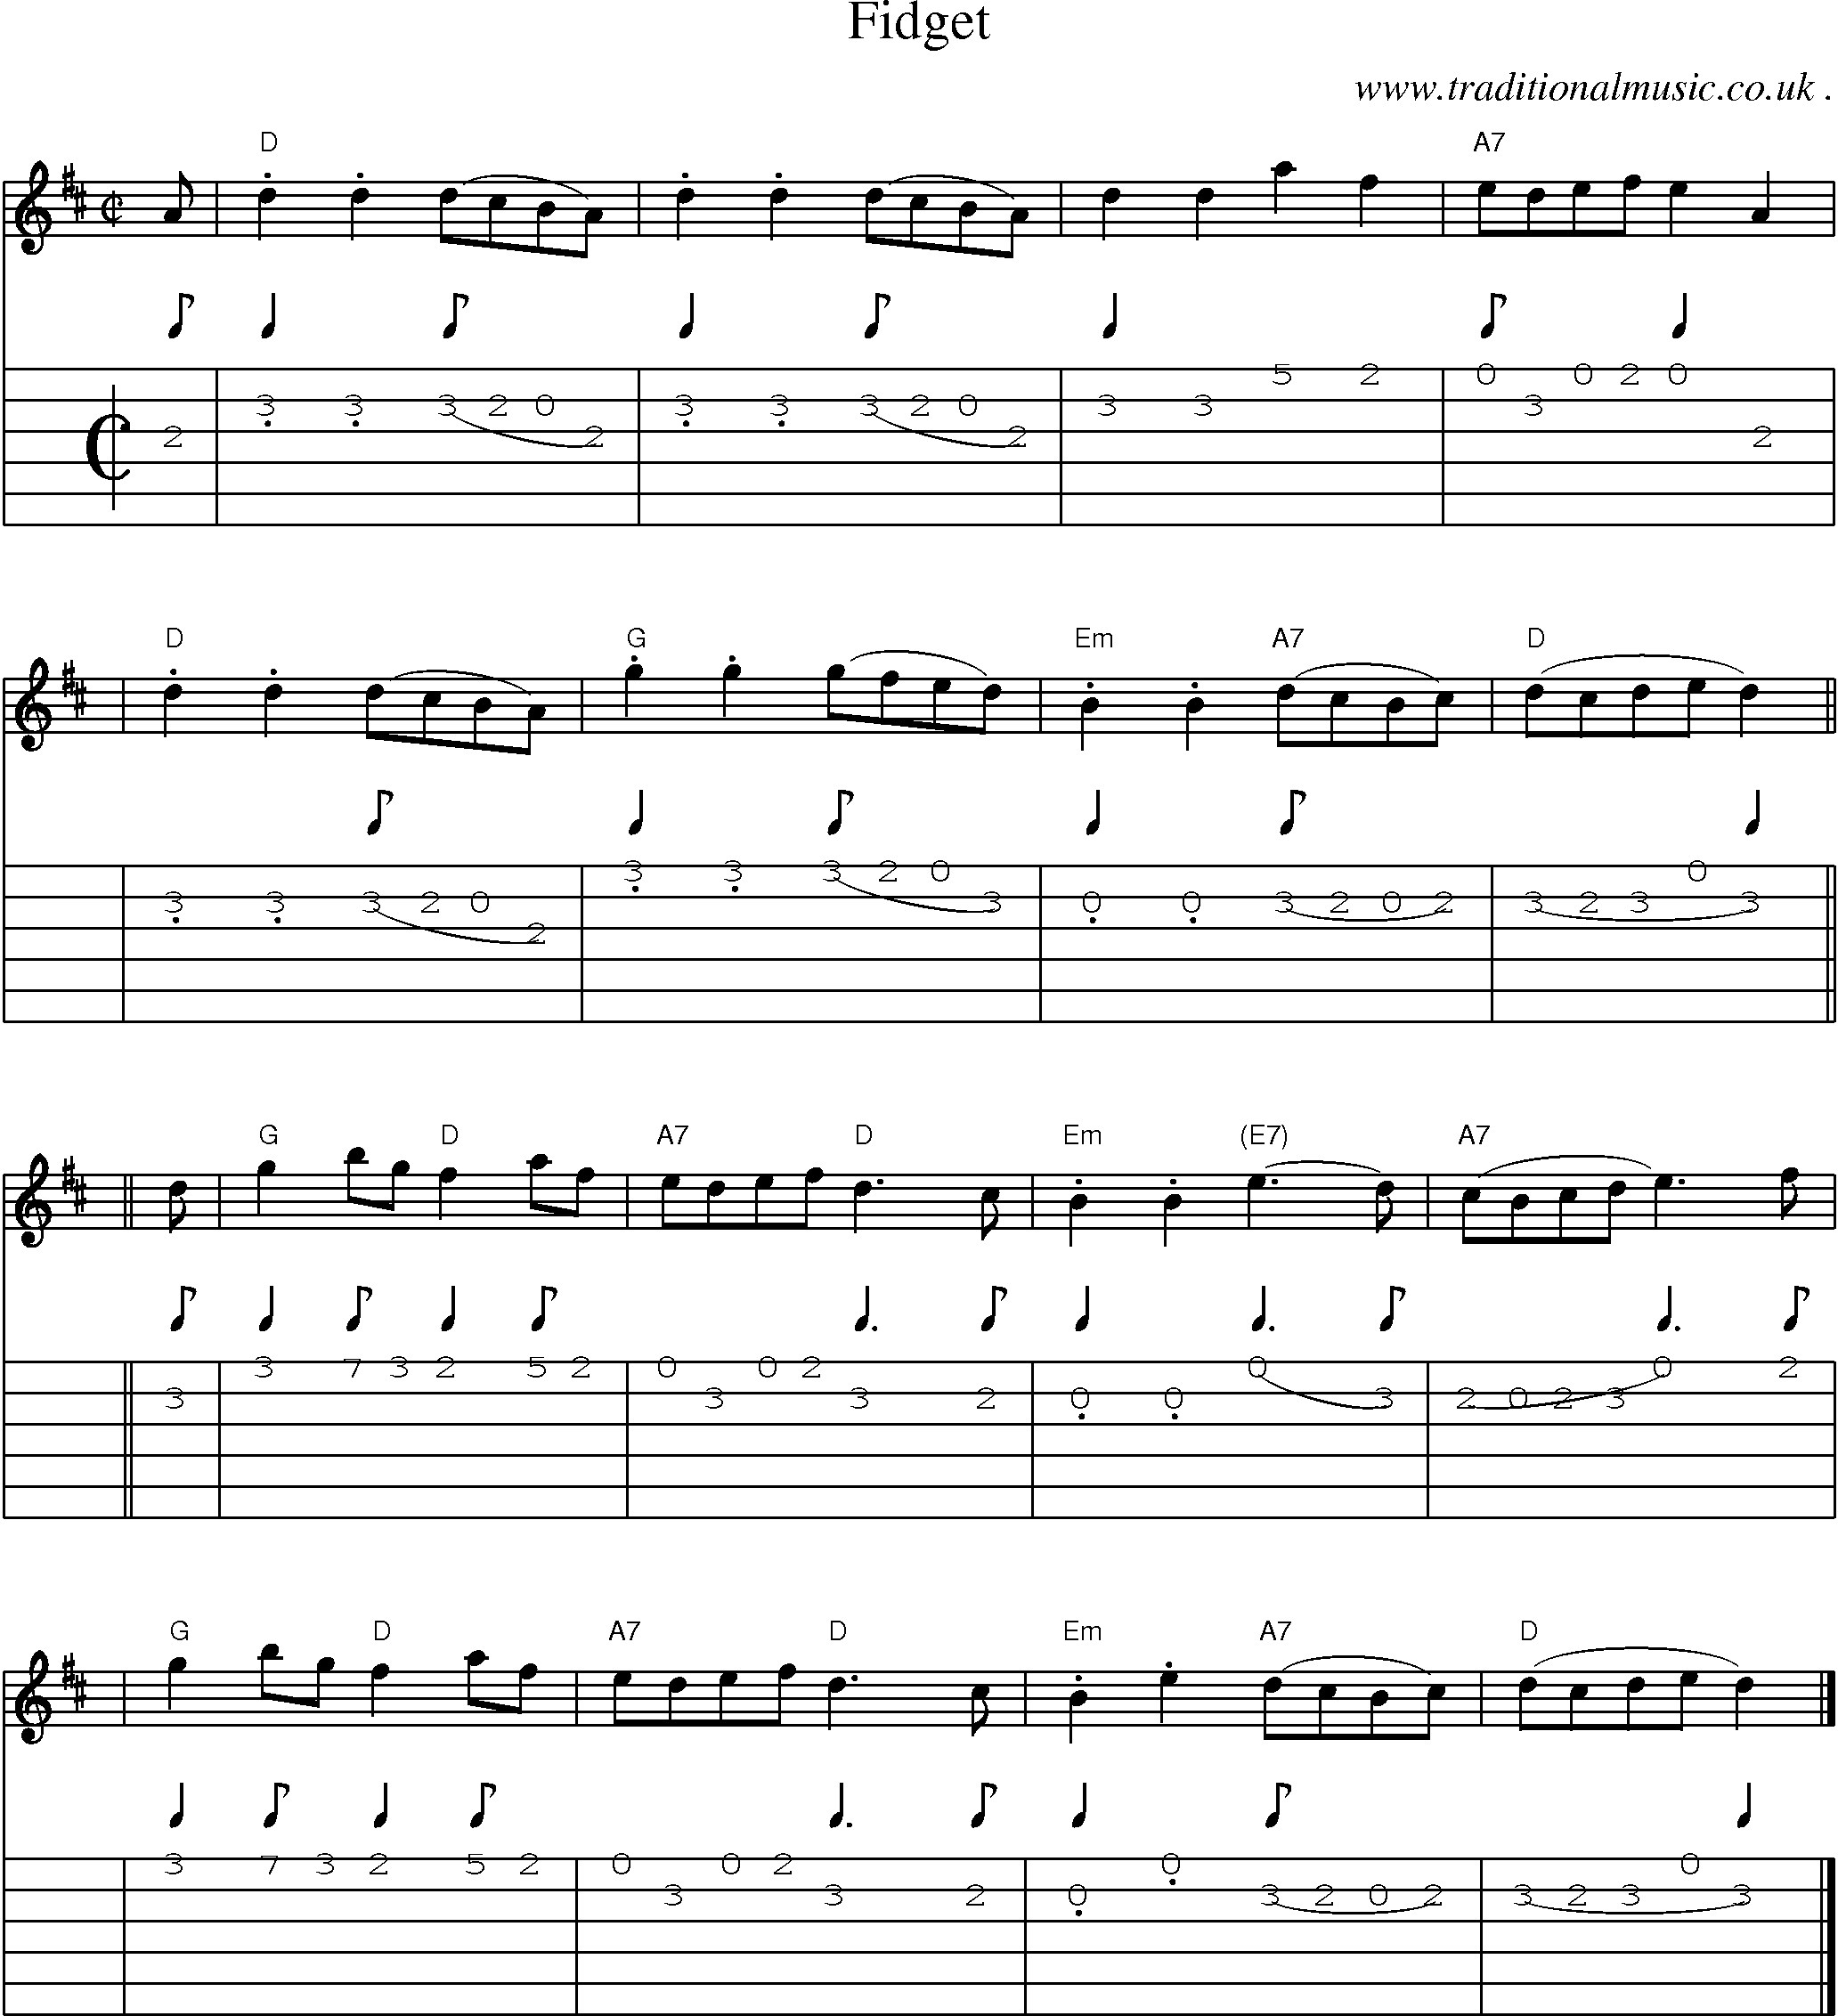 Sheet-music  score, Chords and Guitar Tabs for Fidget